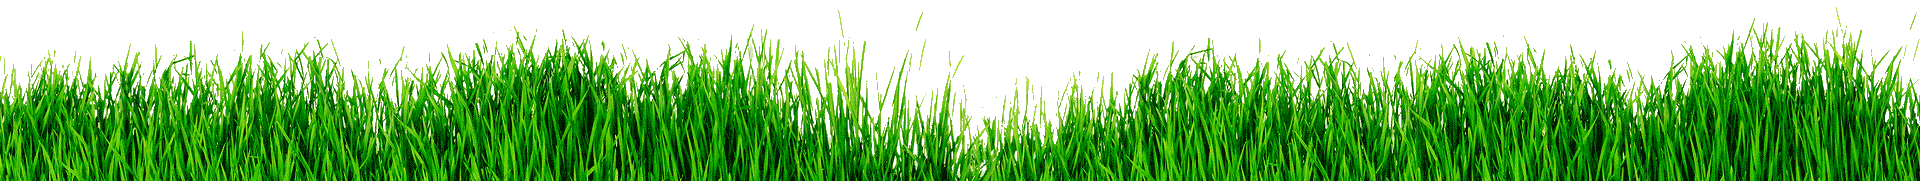 decorative image of blades of grass